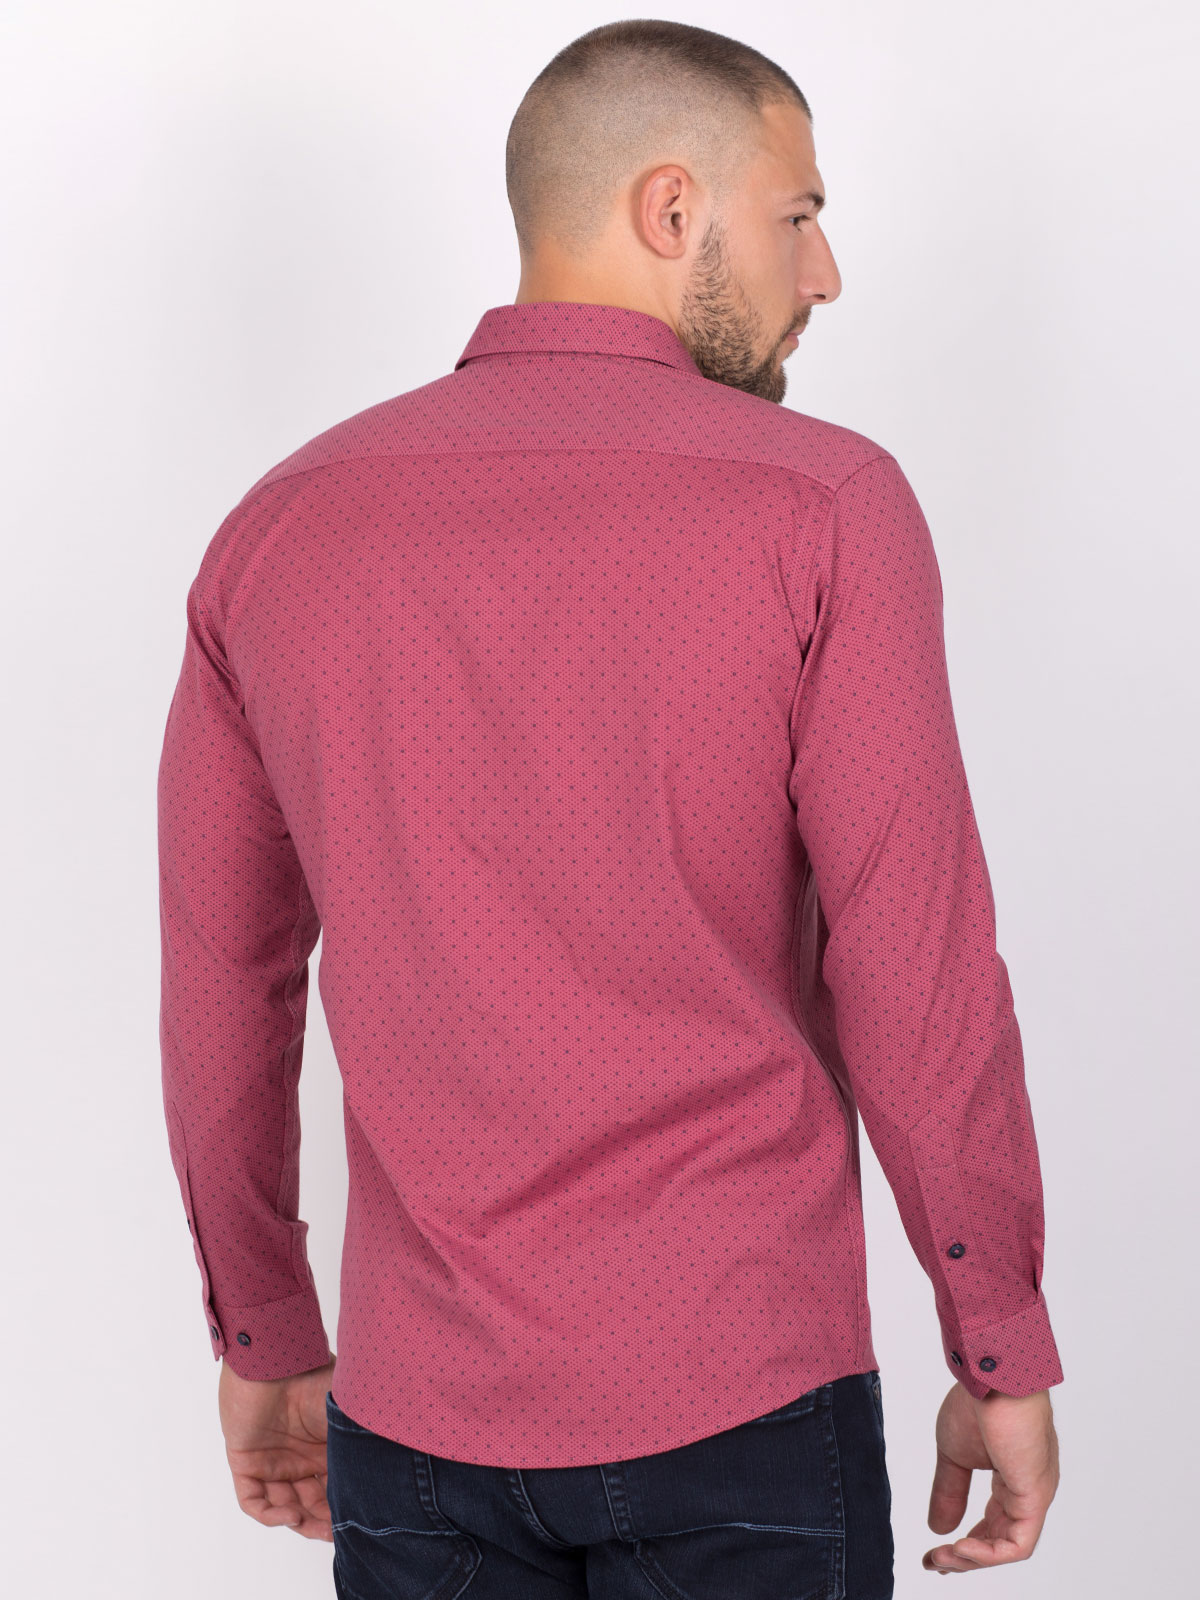 Shirt in cherry color with a print of fi - 21510 € 43.87 img4